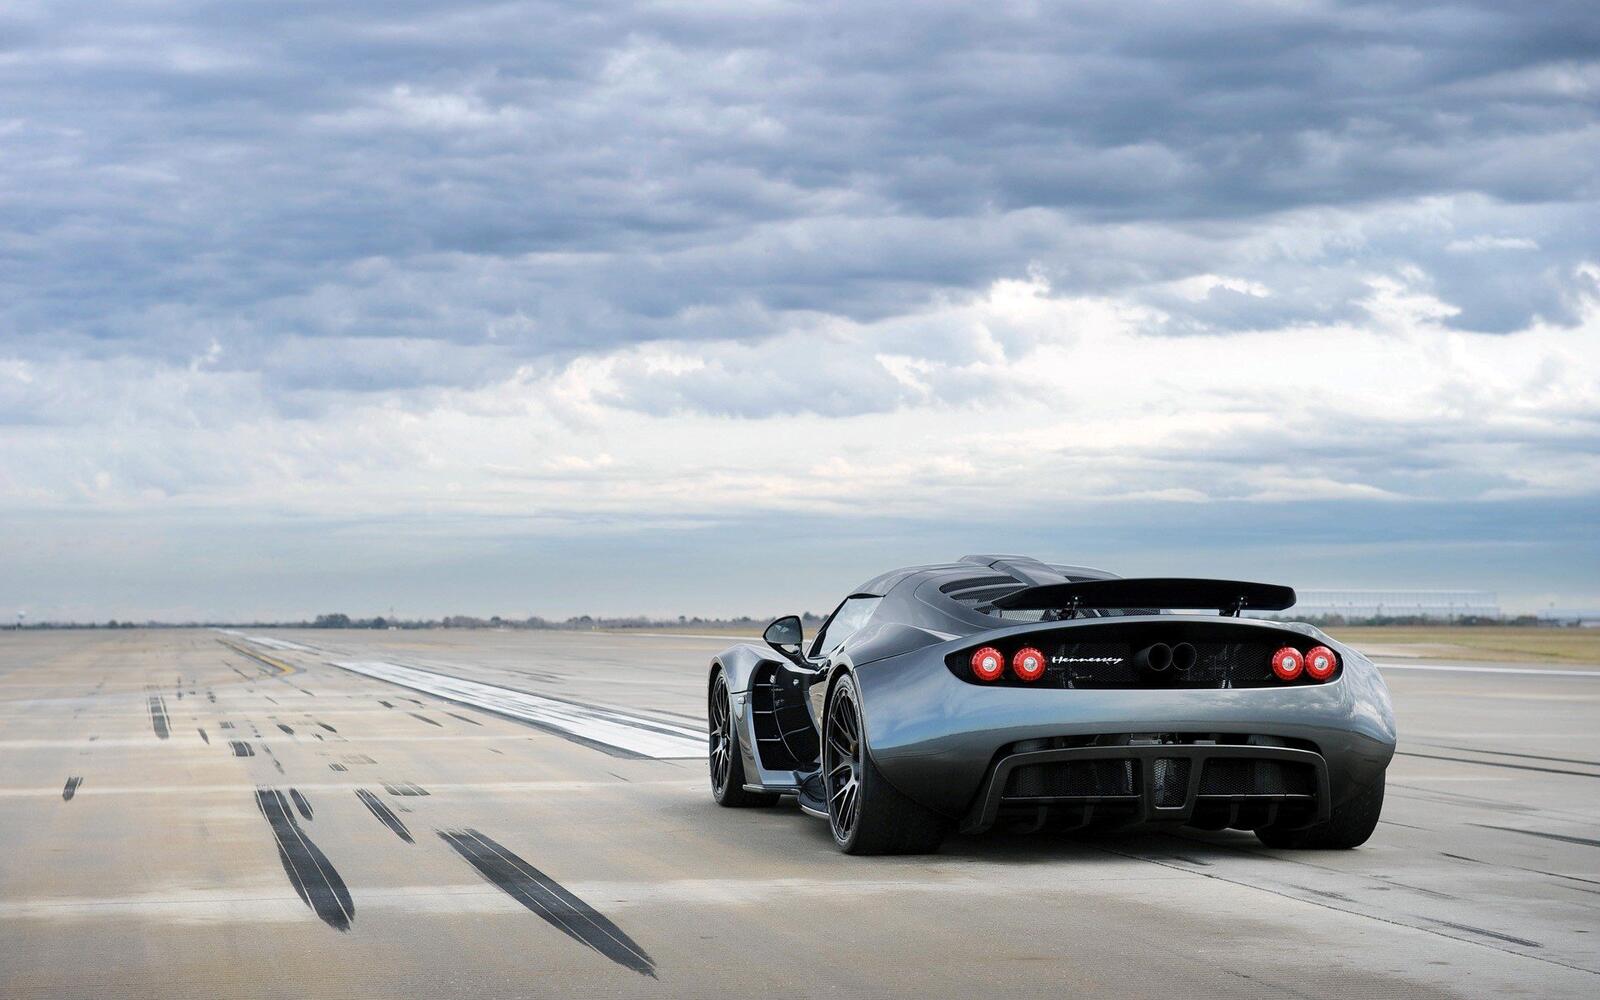 Free photo The Hennessey Venom GT on the runway.